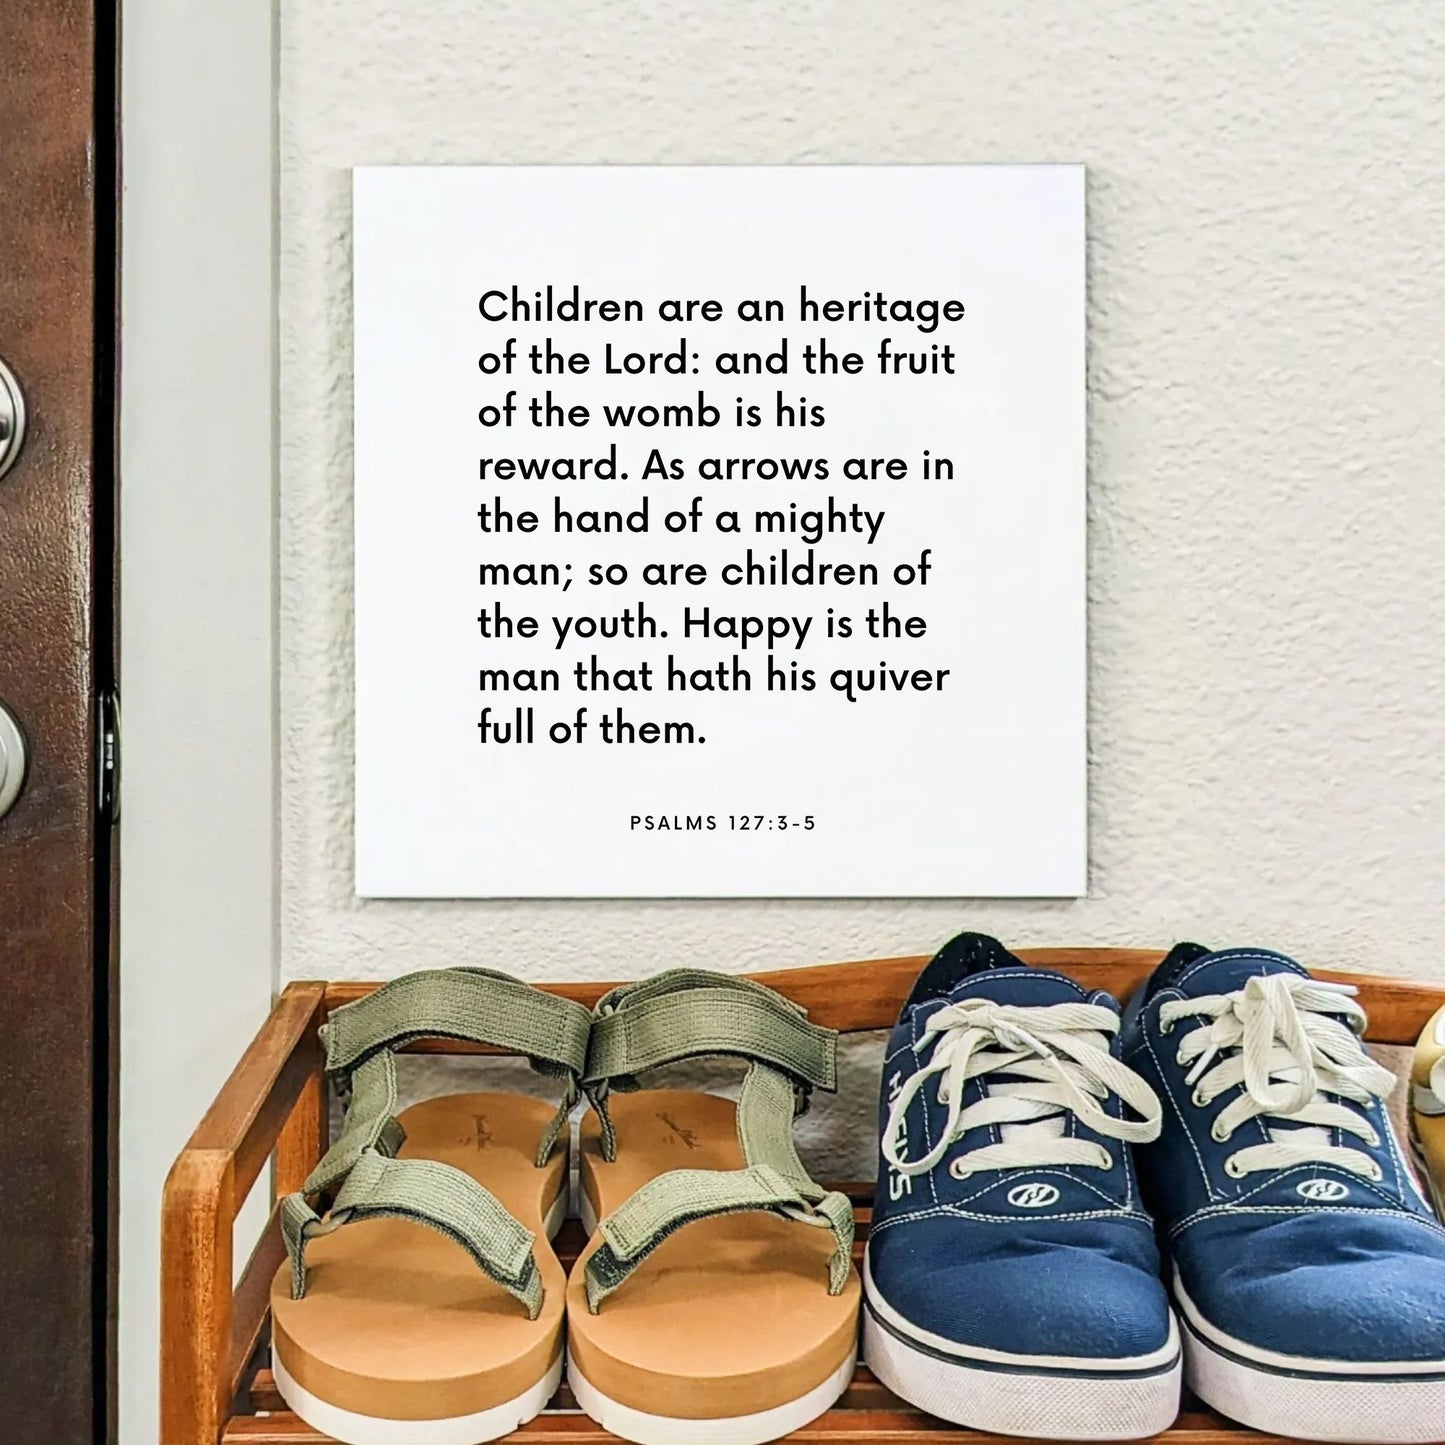 Shoes mouting of the scripture tile for Psalms 127:3-5 - "Children are an heritage of the Lord"